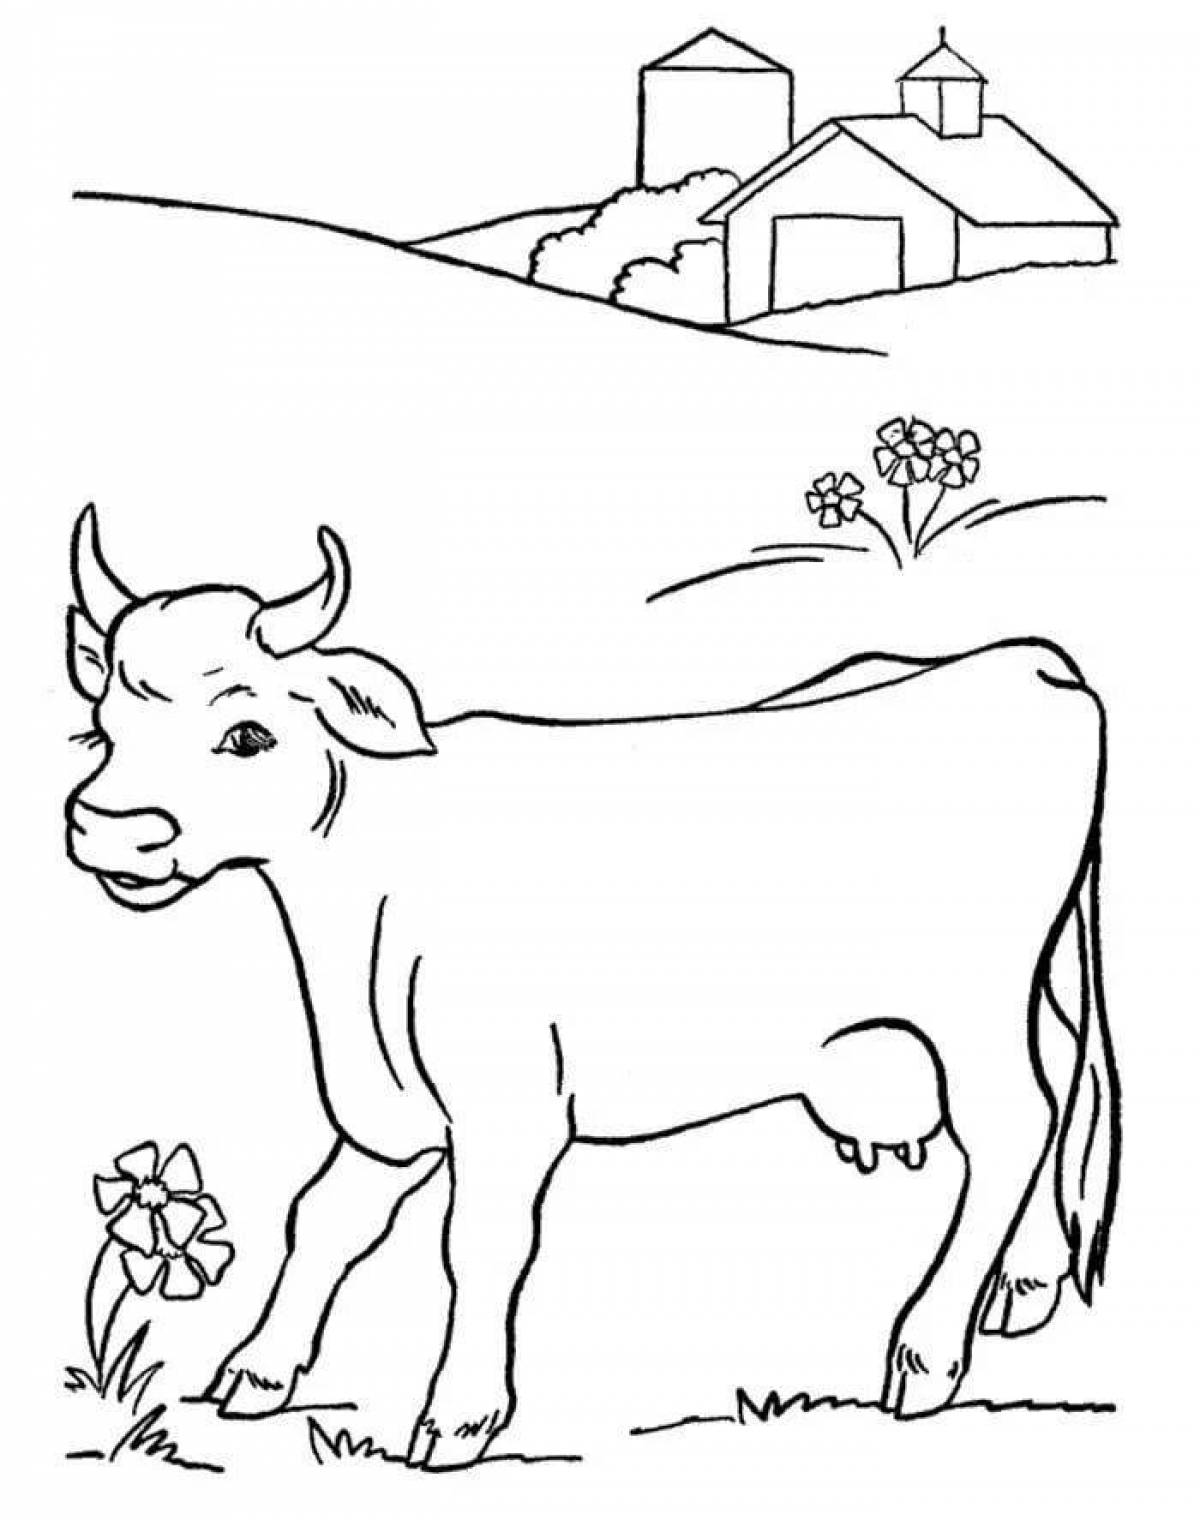 Fun coloring pages of pets